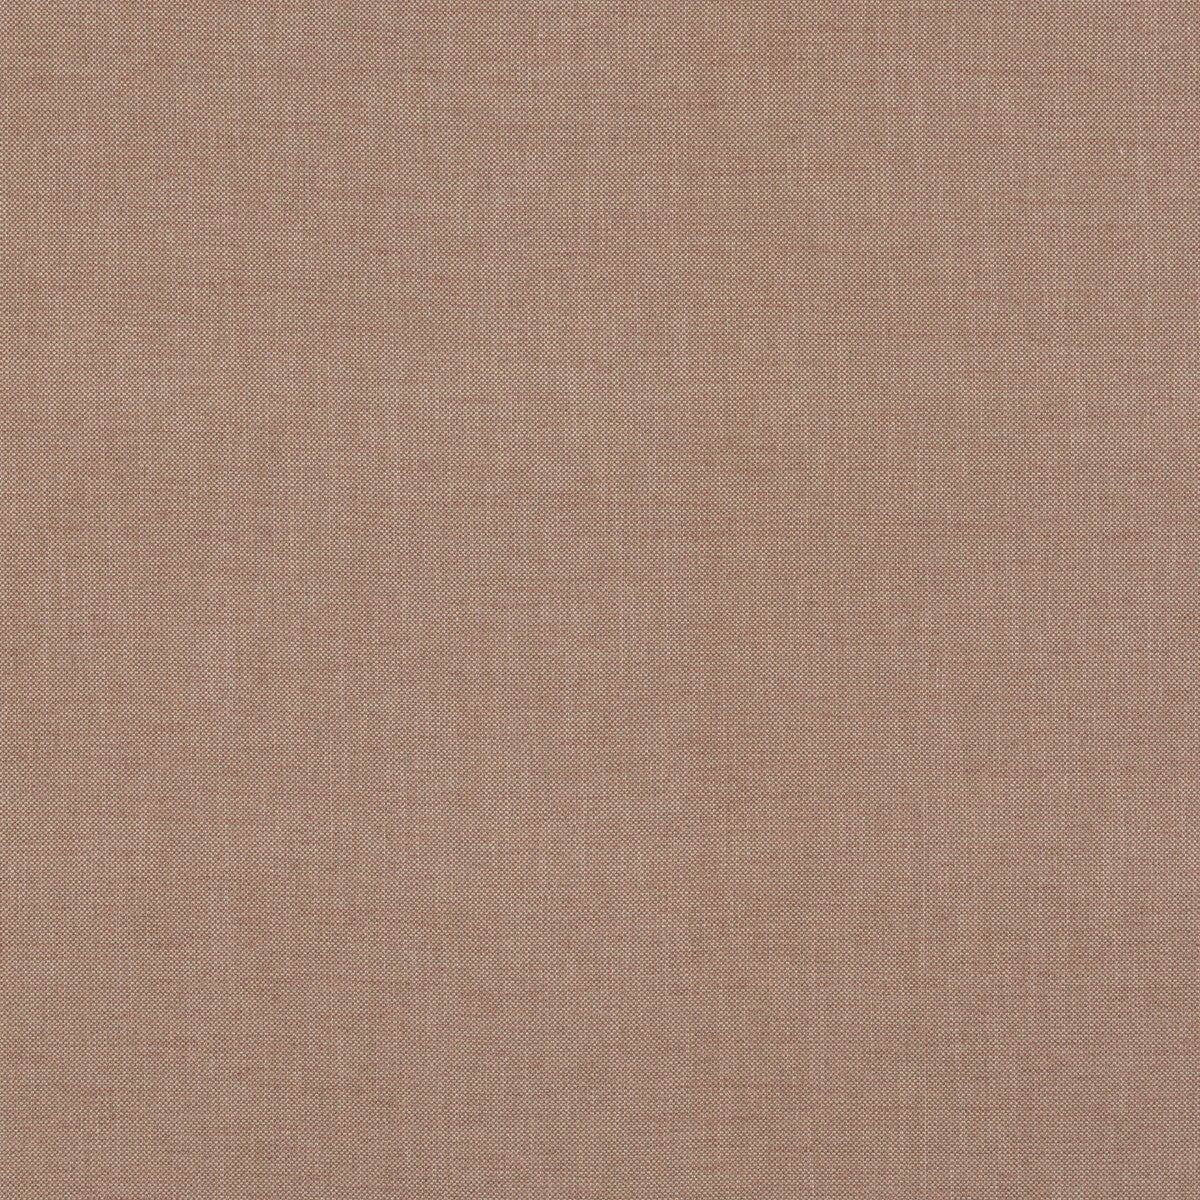 Darwen fabric in blush color - pattern BF10957.440.0 - by G P &amp; J Baker in the Baker House Textures collection